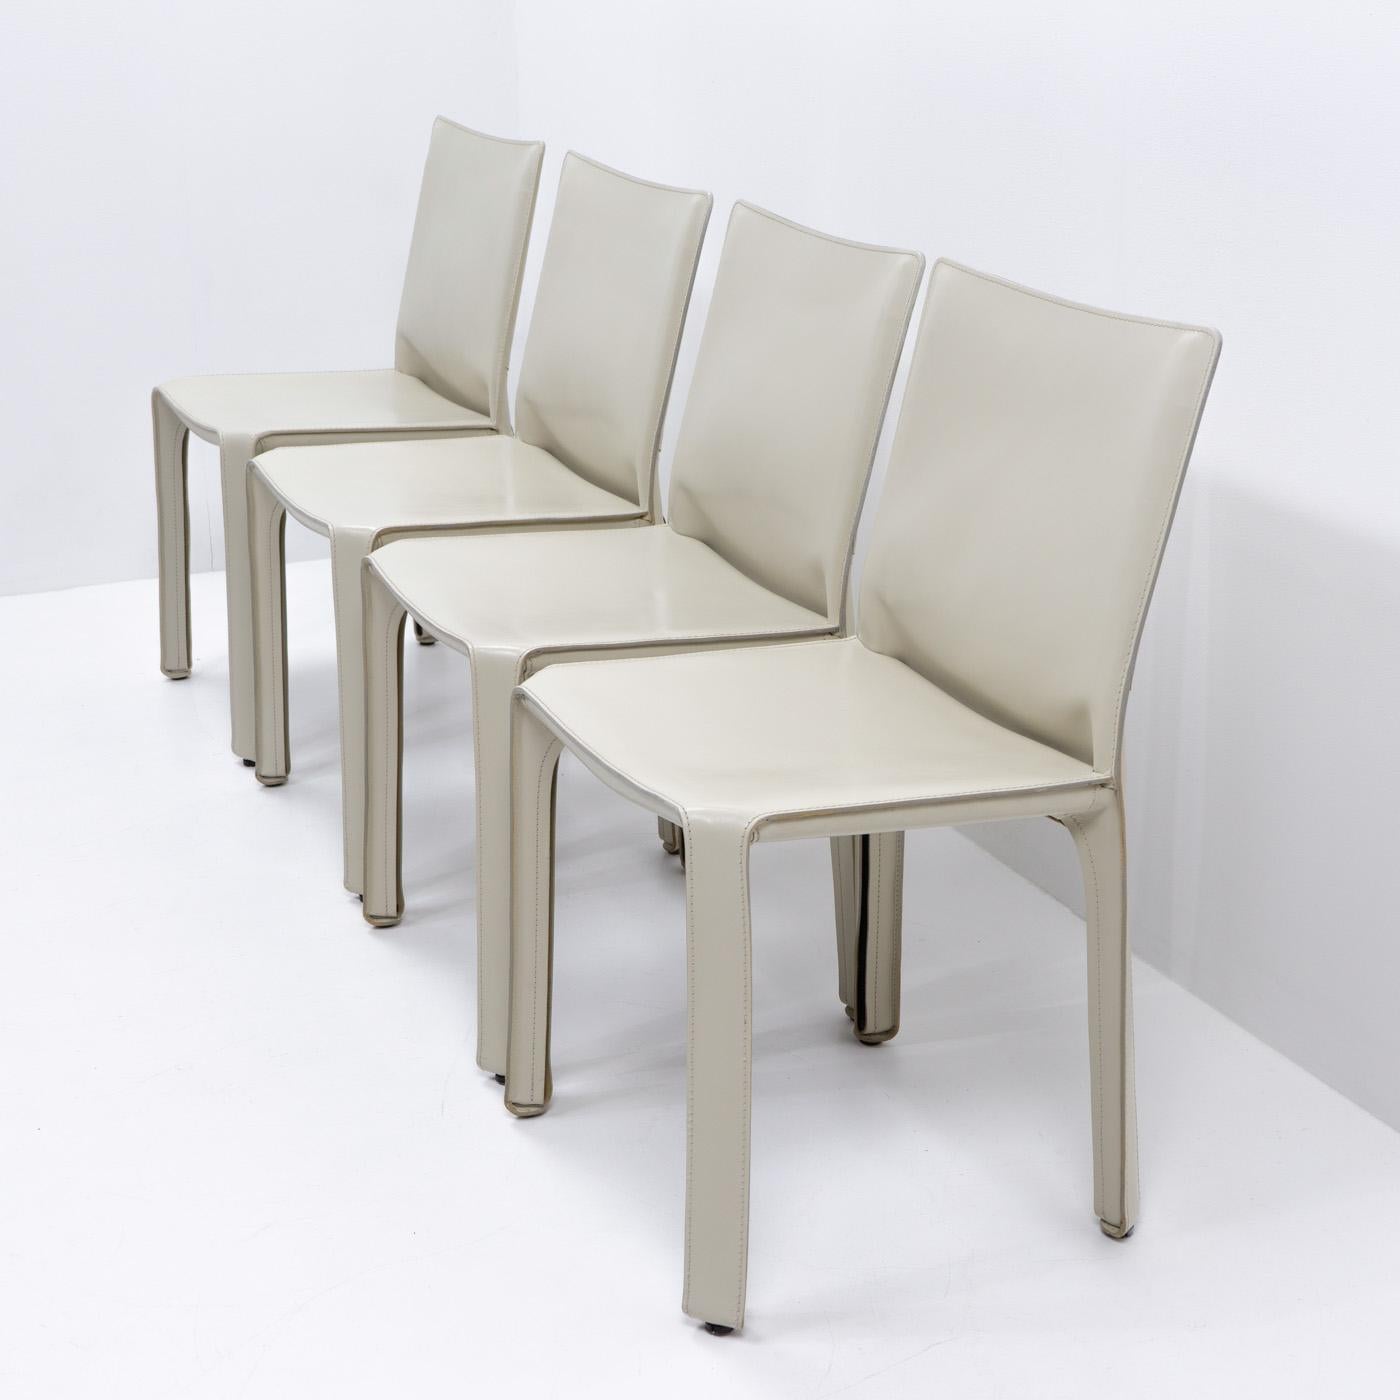 Italian Cab 412 Chairs in Cream Leather by Mario Bellini for Cassina, Set of 4 For Sale